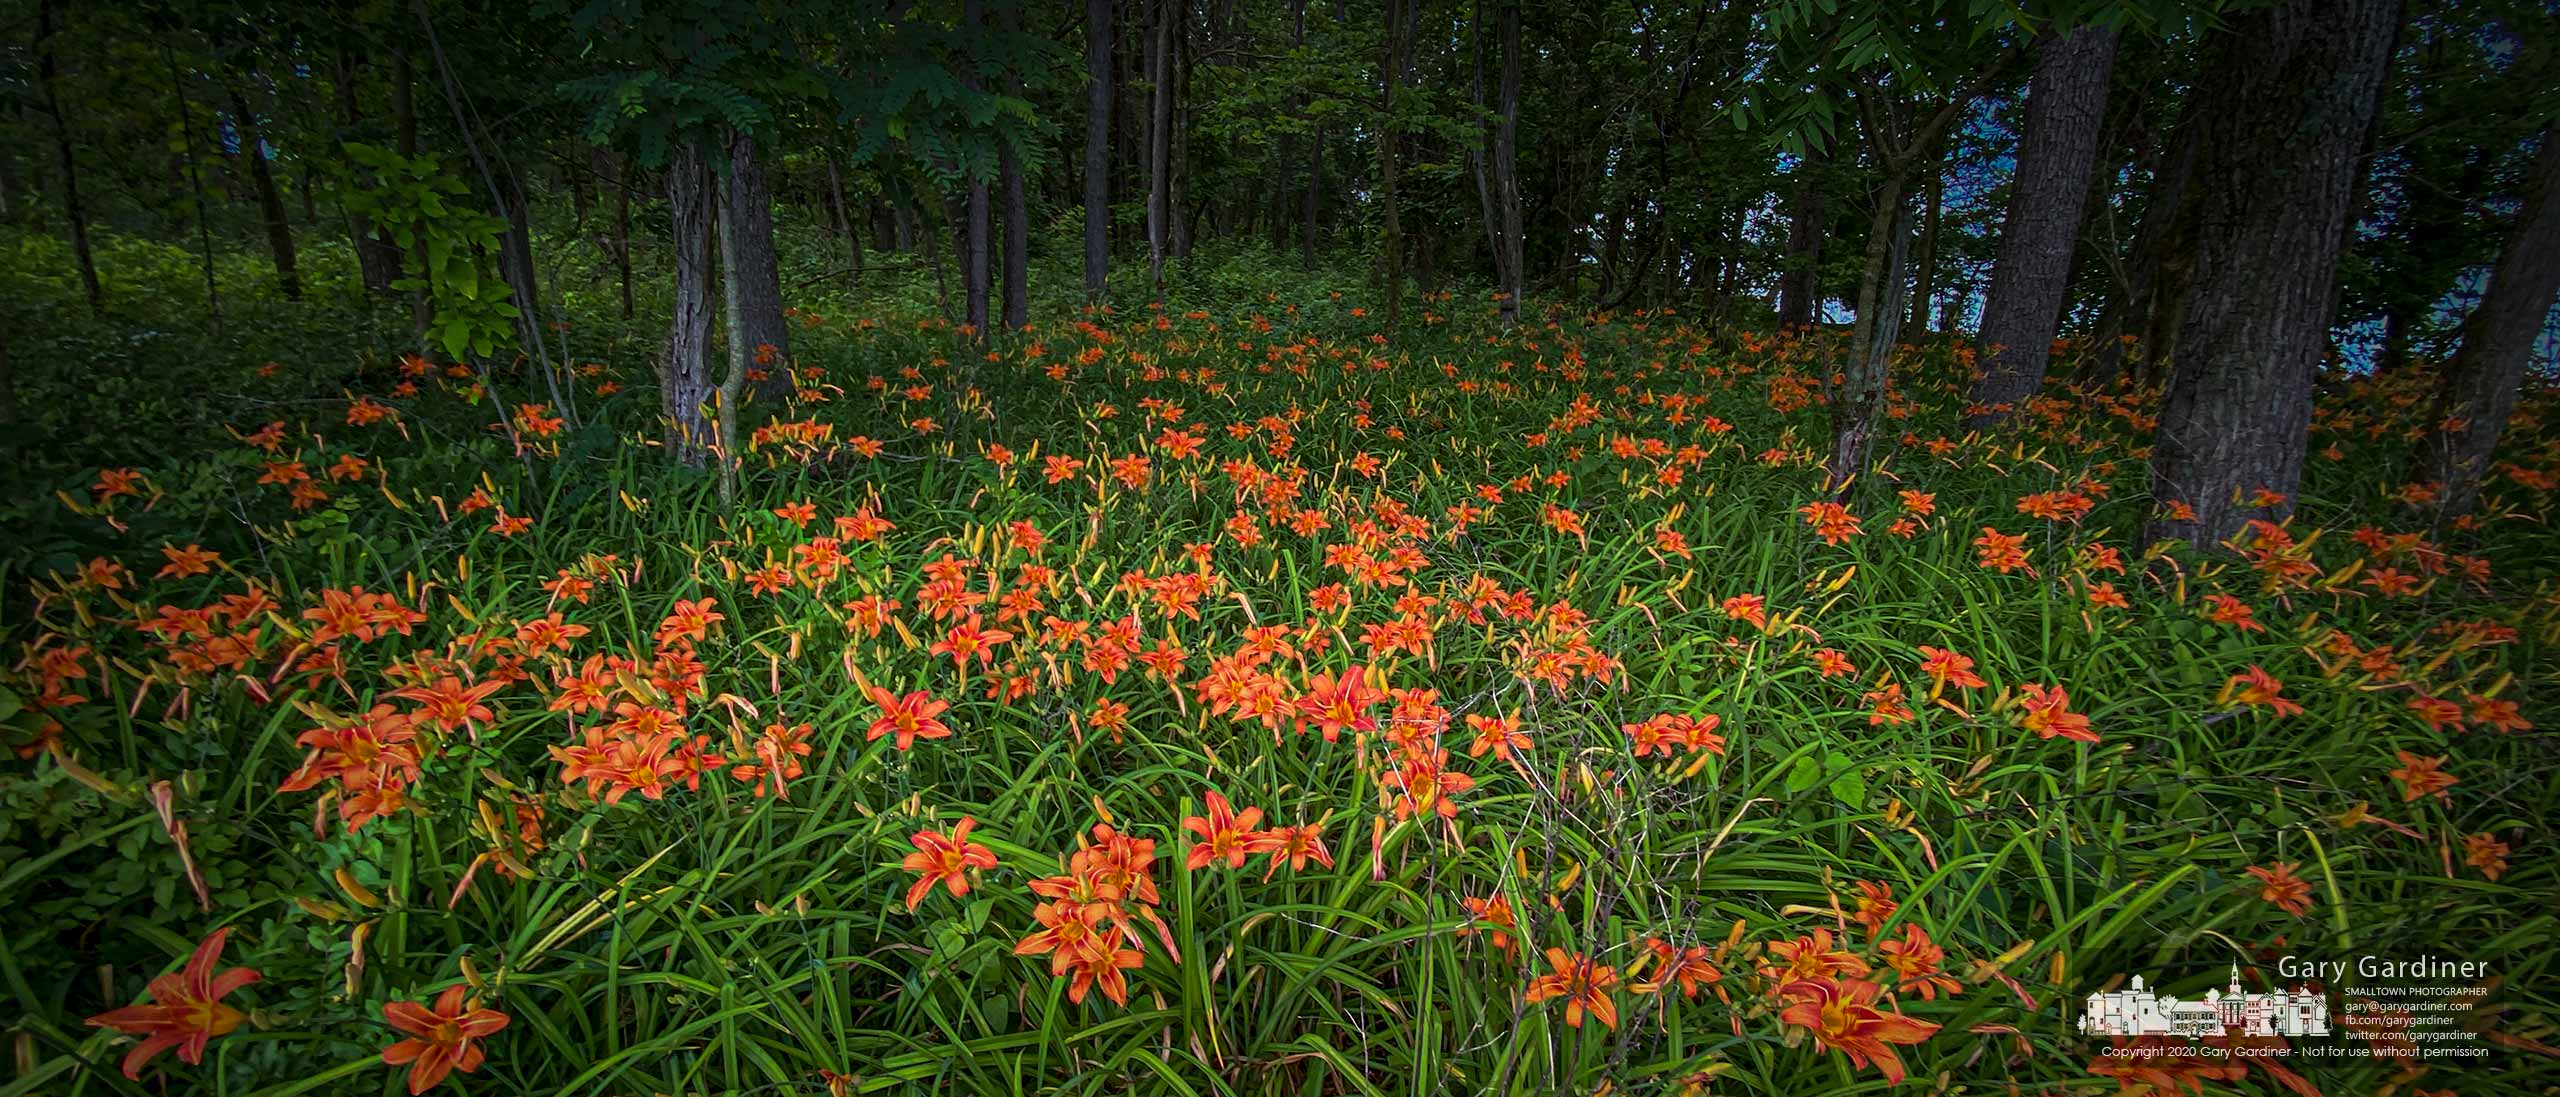 A small field of daylilies blooms at the edge of a small stand of trees near the boat landing at Oxbow om Hoover Reservoir. My Final Photo for June 27, 2020.